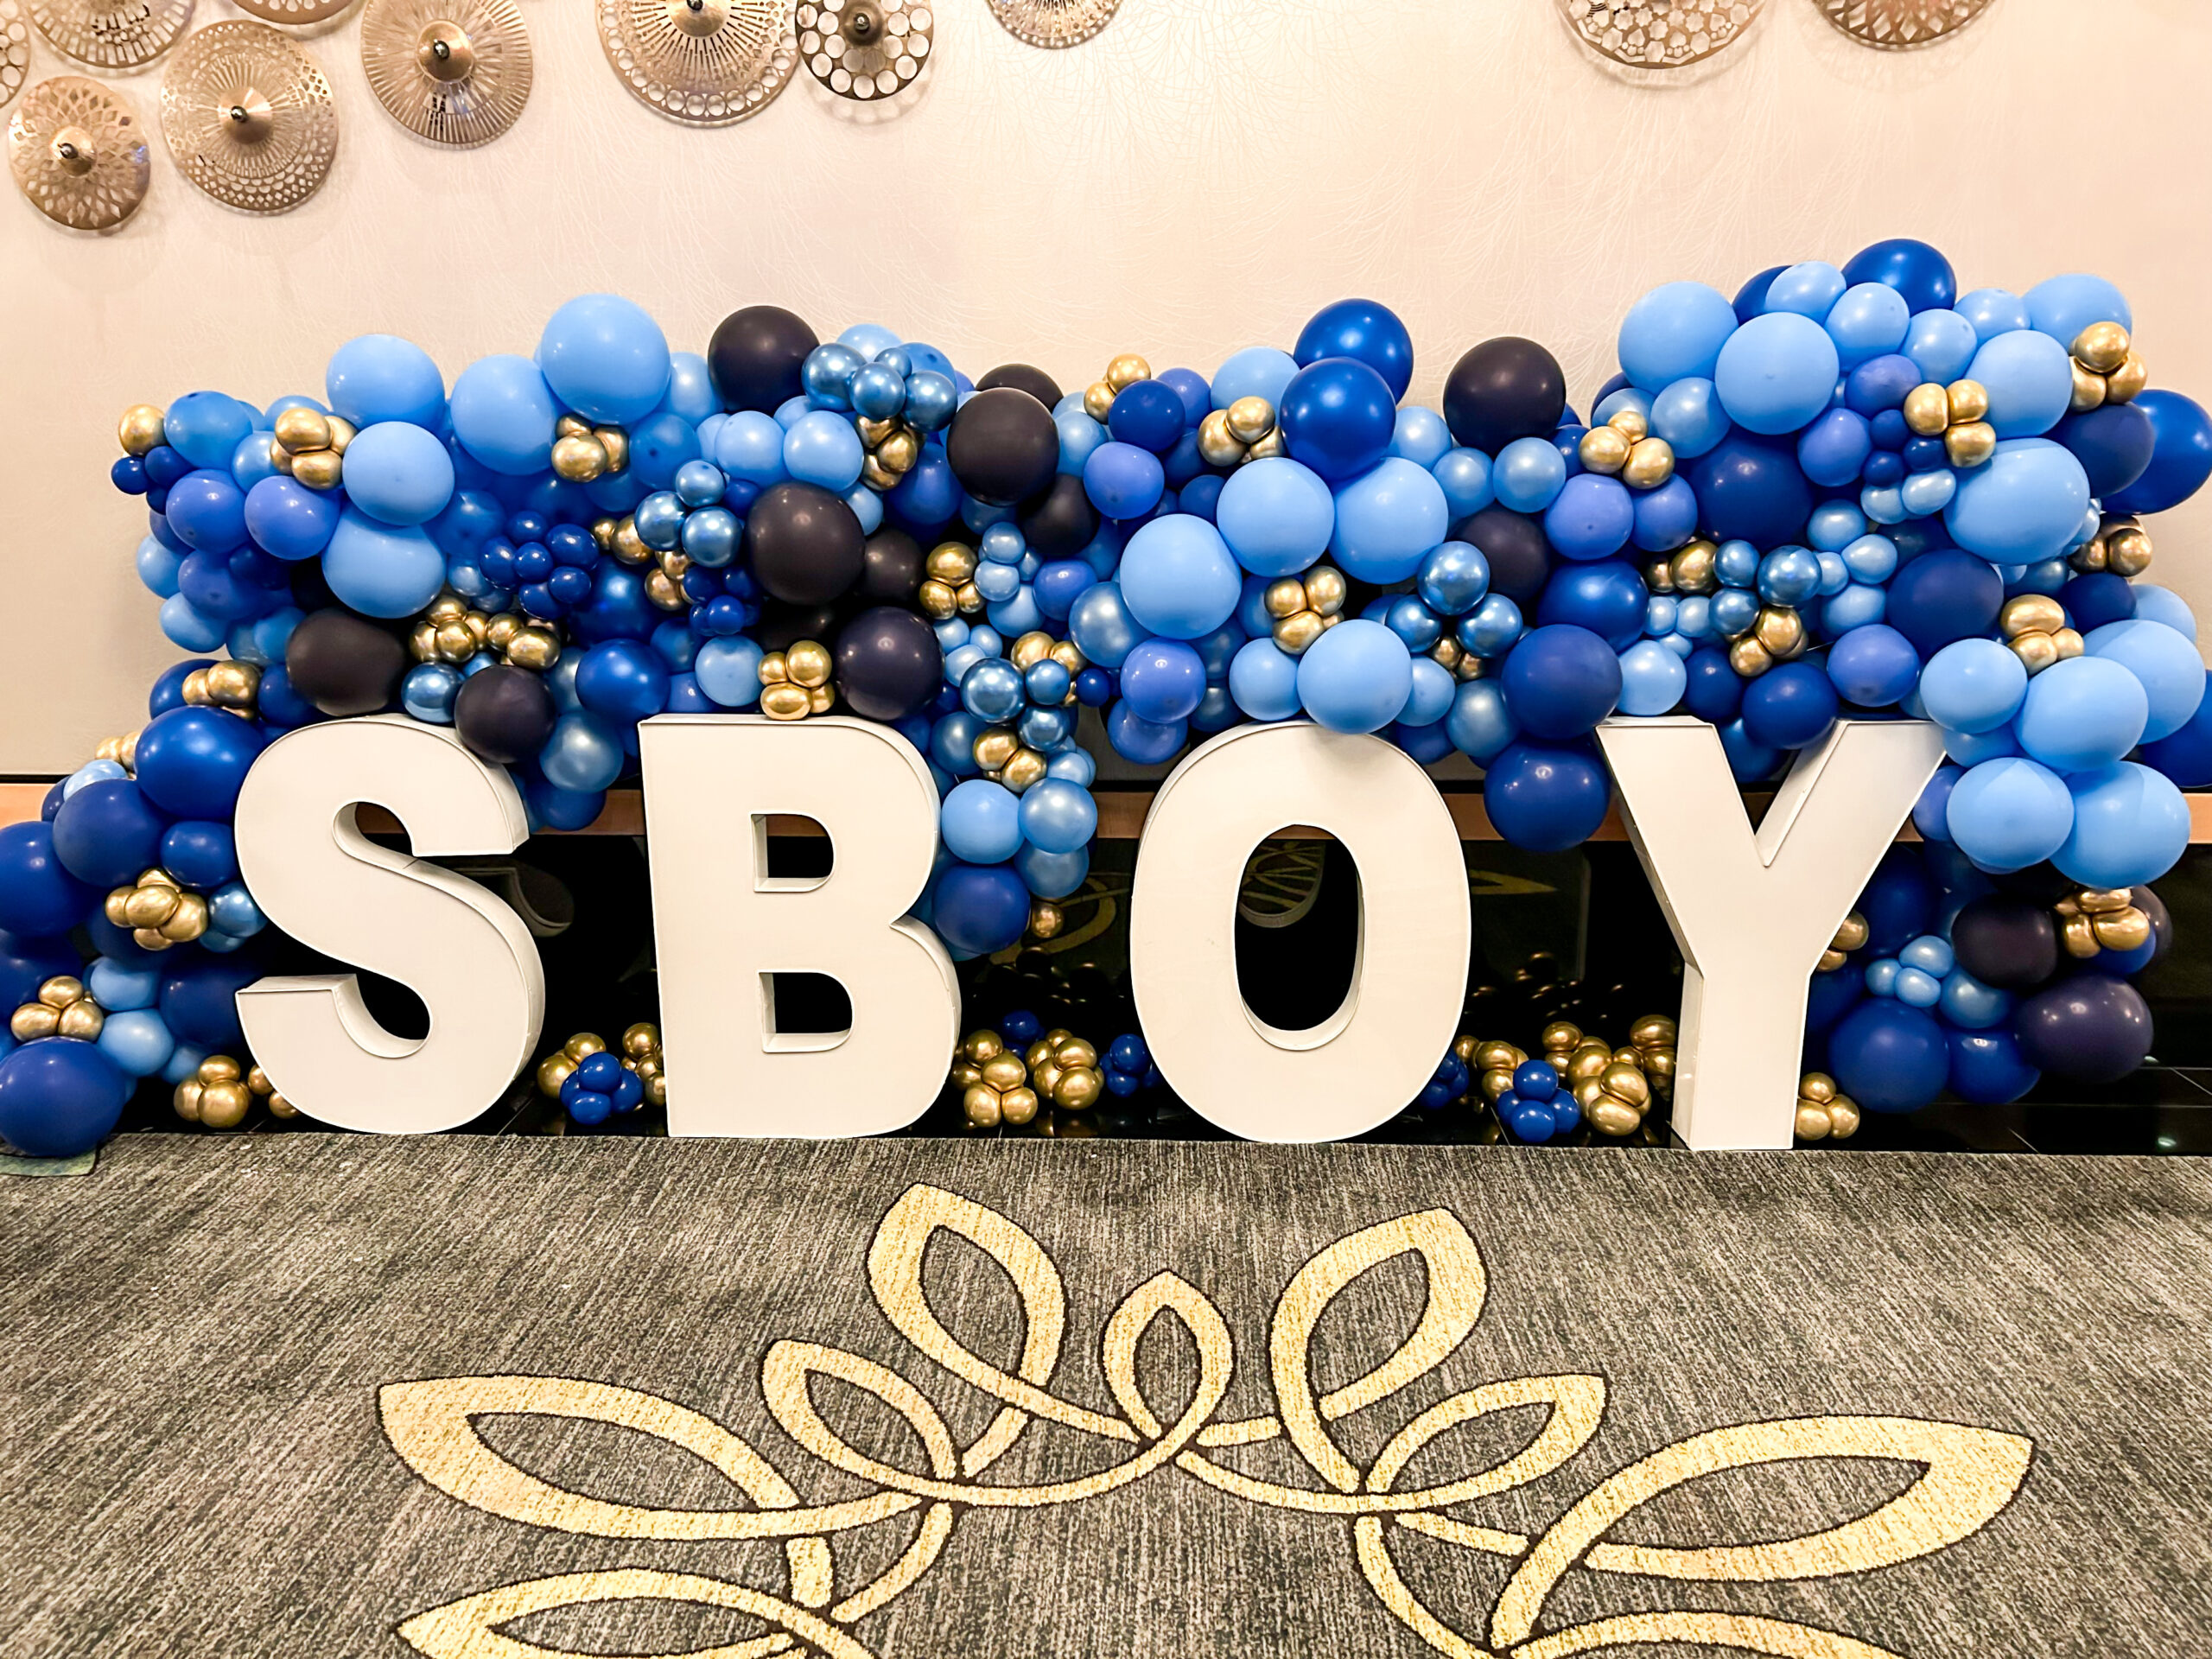 SBOY letters and blue balloons.